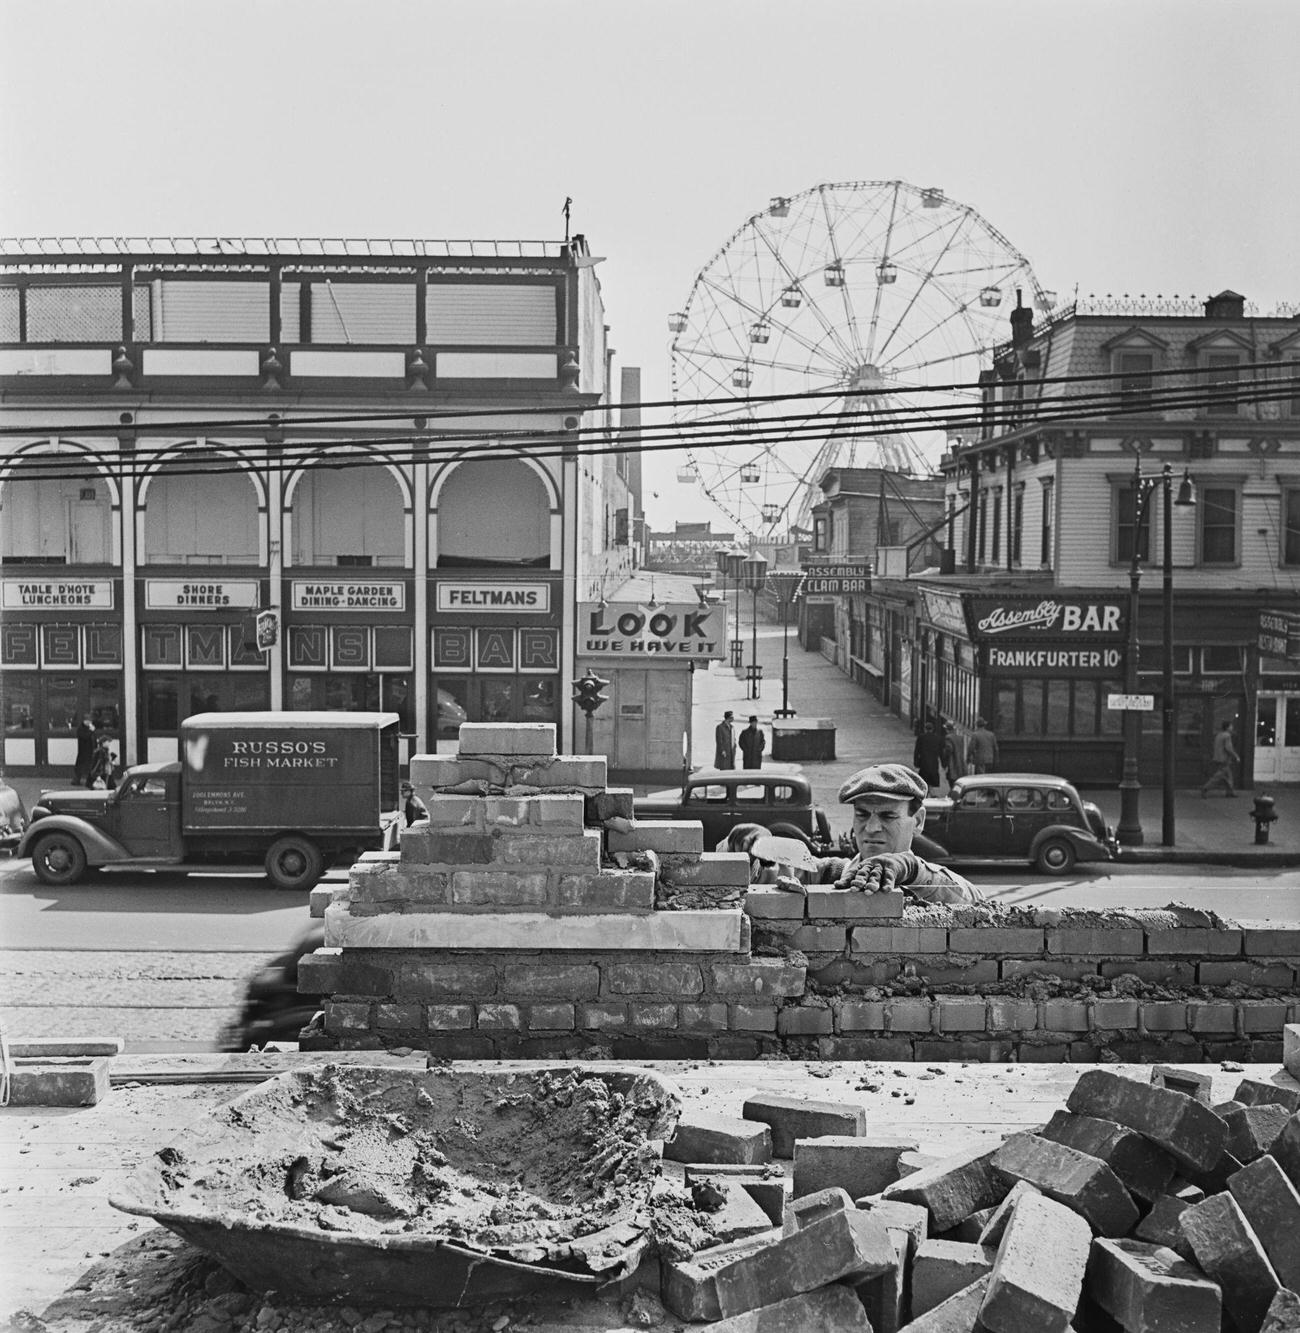 Bricklayer Building Wall With Wonder Wheel In Background At Coney Island, 1950